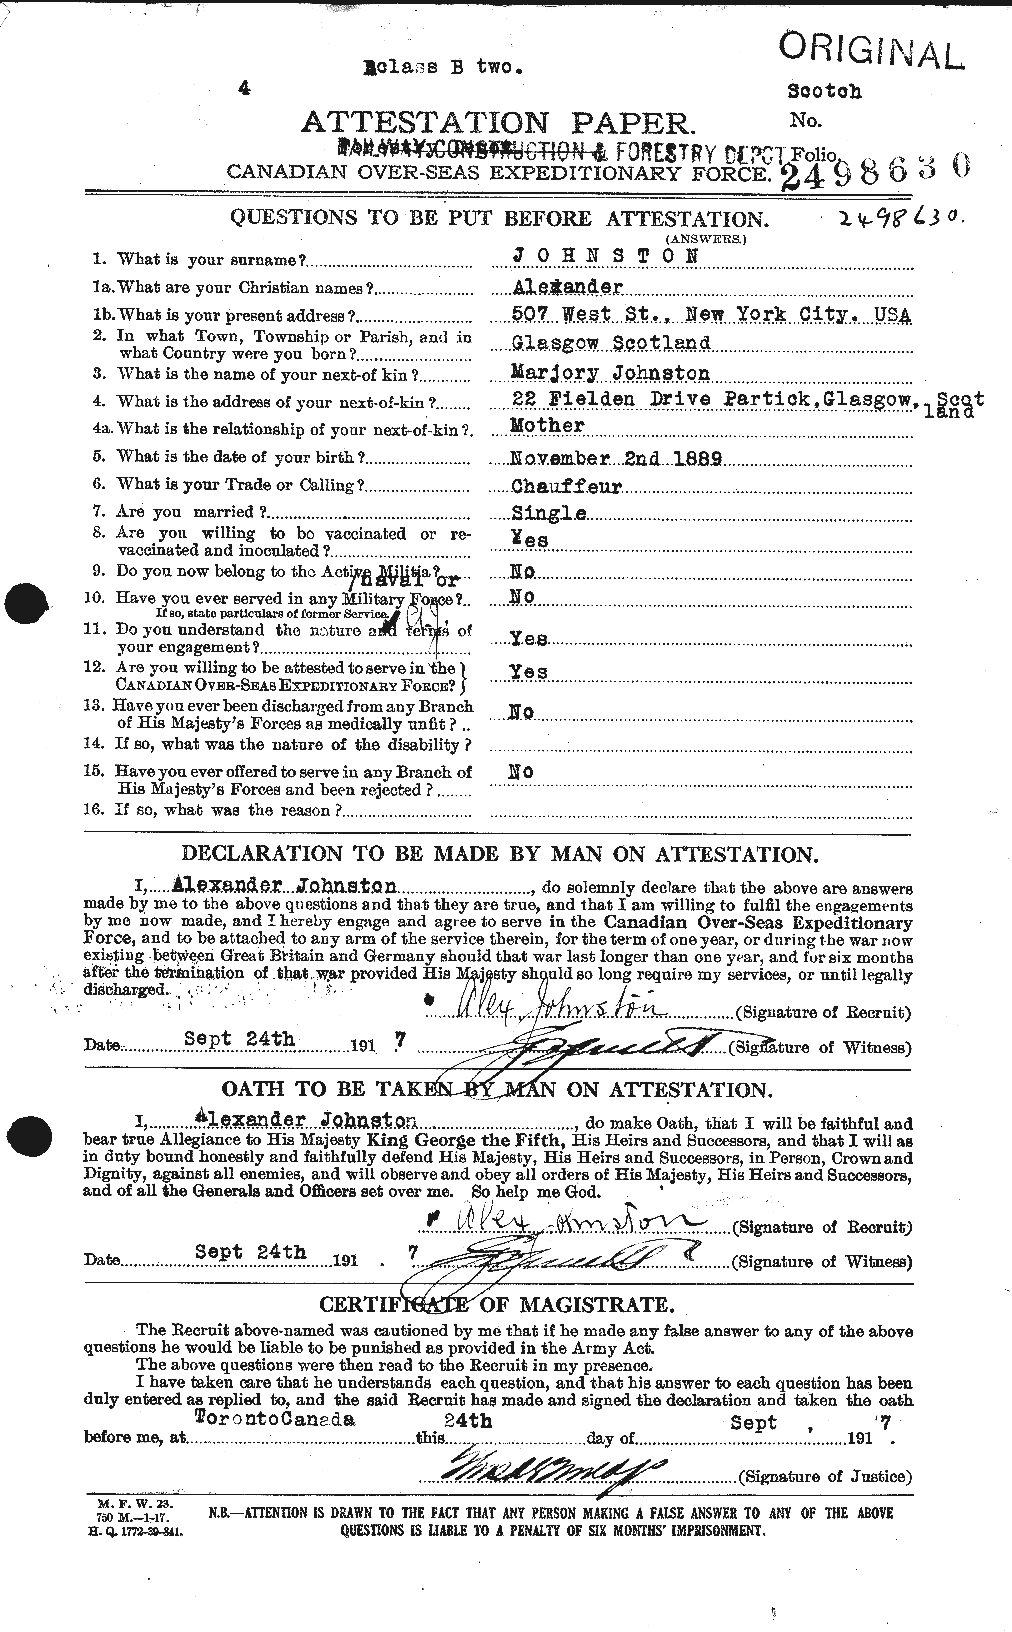 Personnel Records of the First World War - CEF 420965a